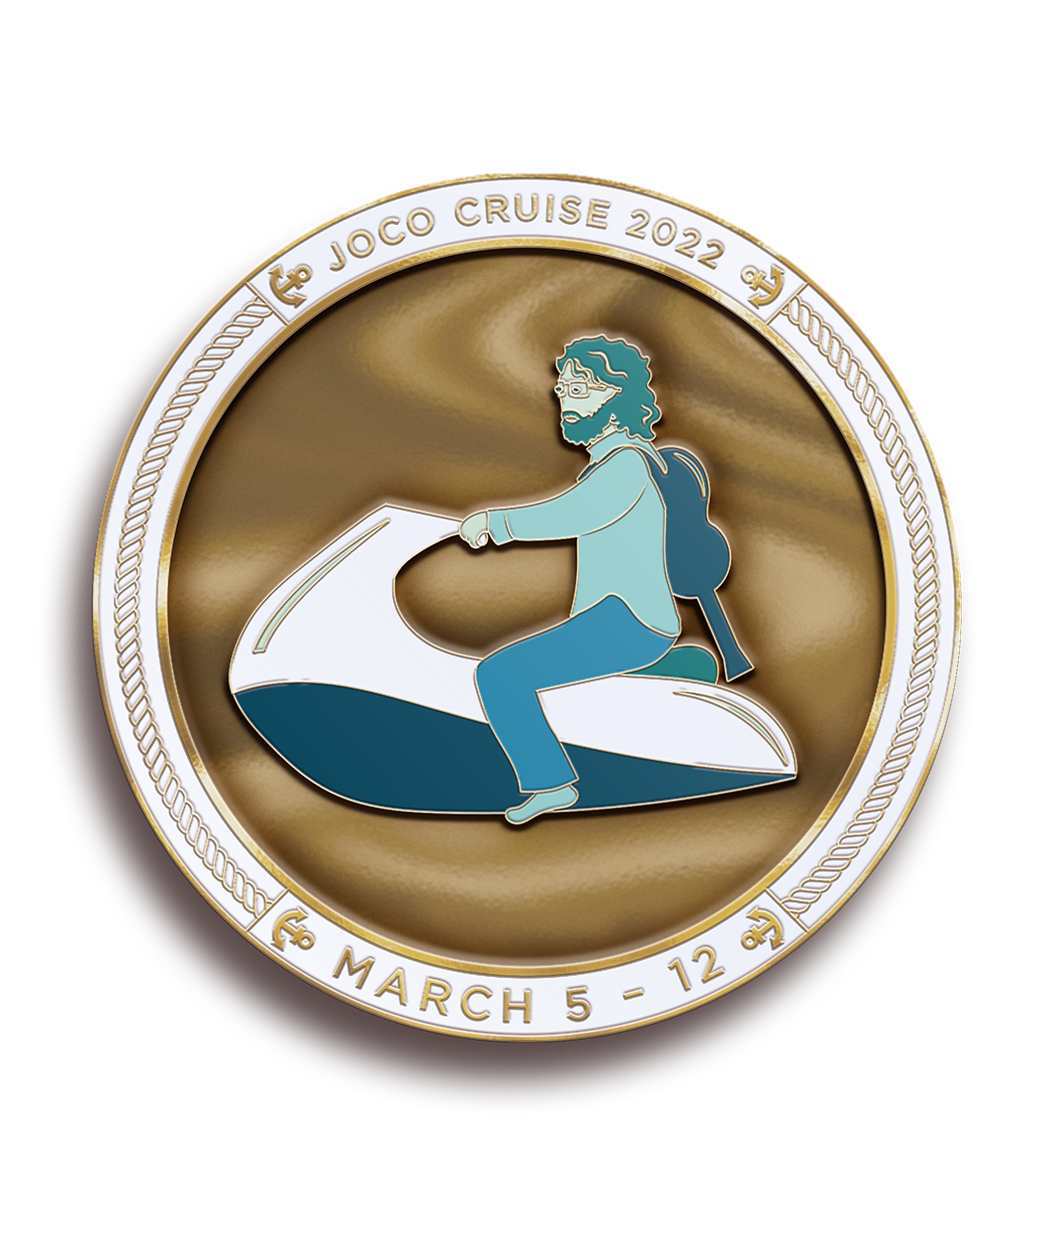 The "JoCo Cruise 2022; March 5-12" challenge coin. This side features a person on a jet ski with a guitar on their back. 